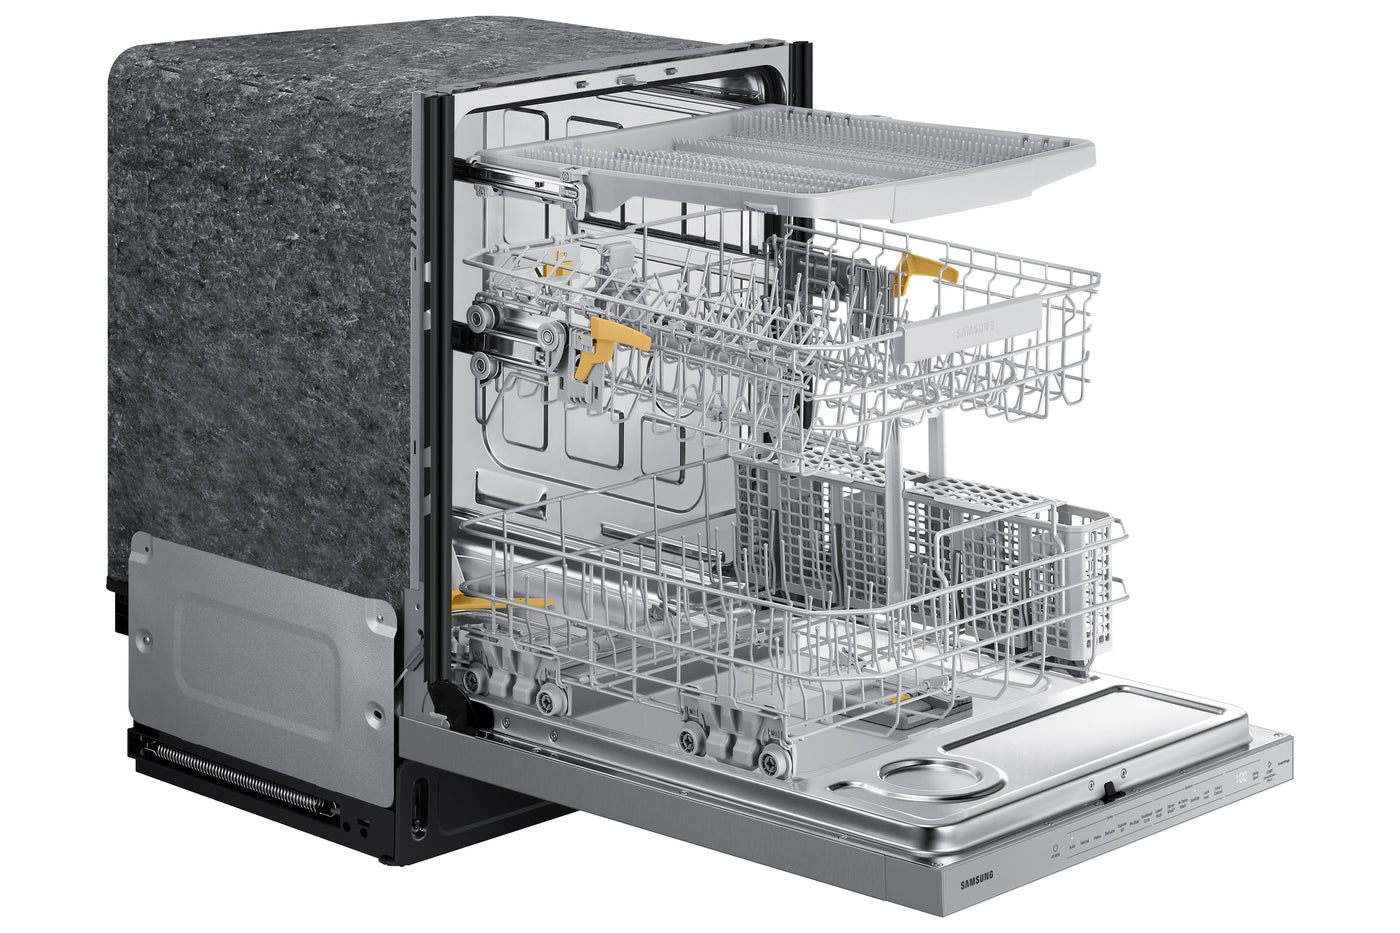 Samsung Stainless Steel Built-In Dishwasher with AutoRelease - DW80B6060US/AC